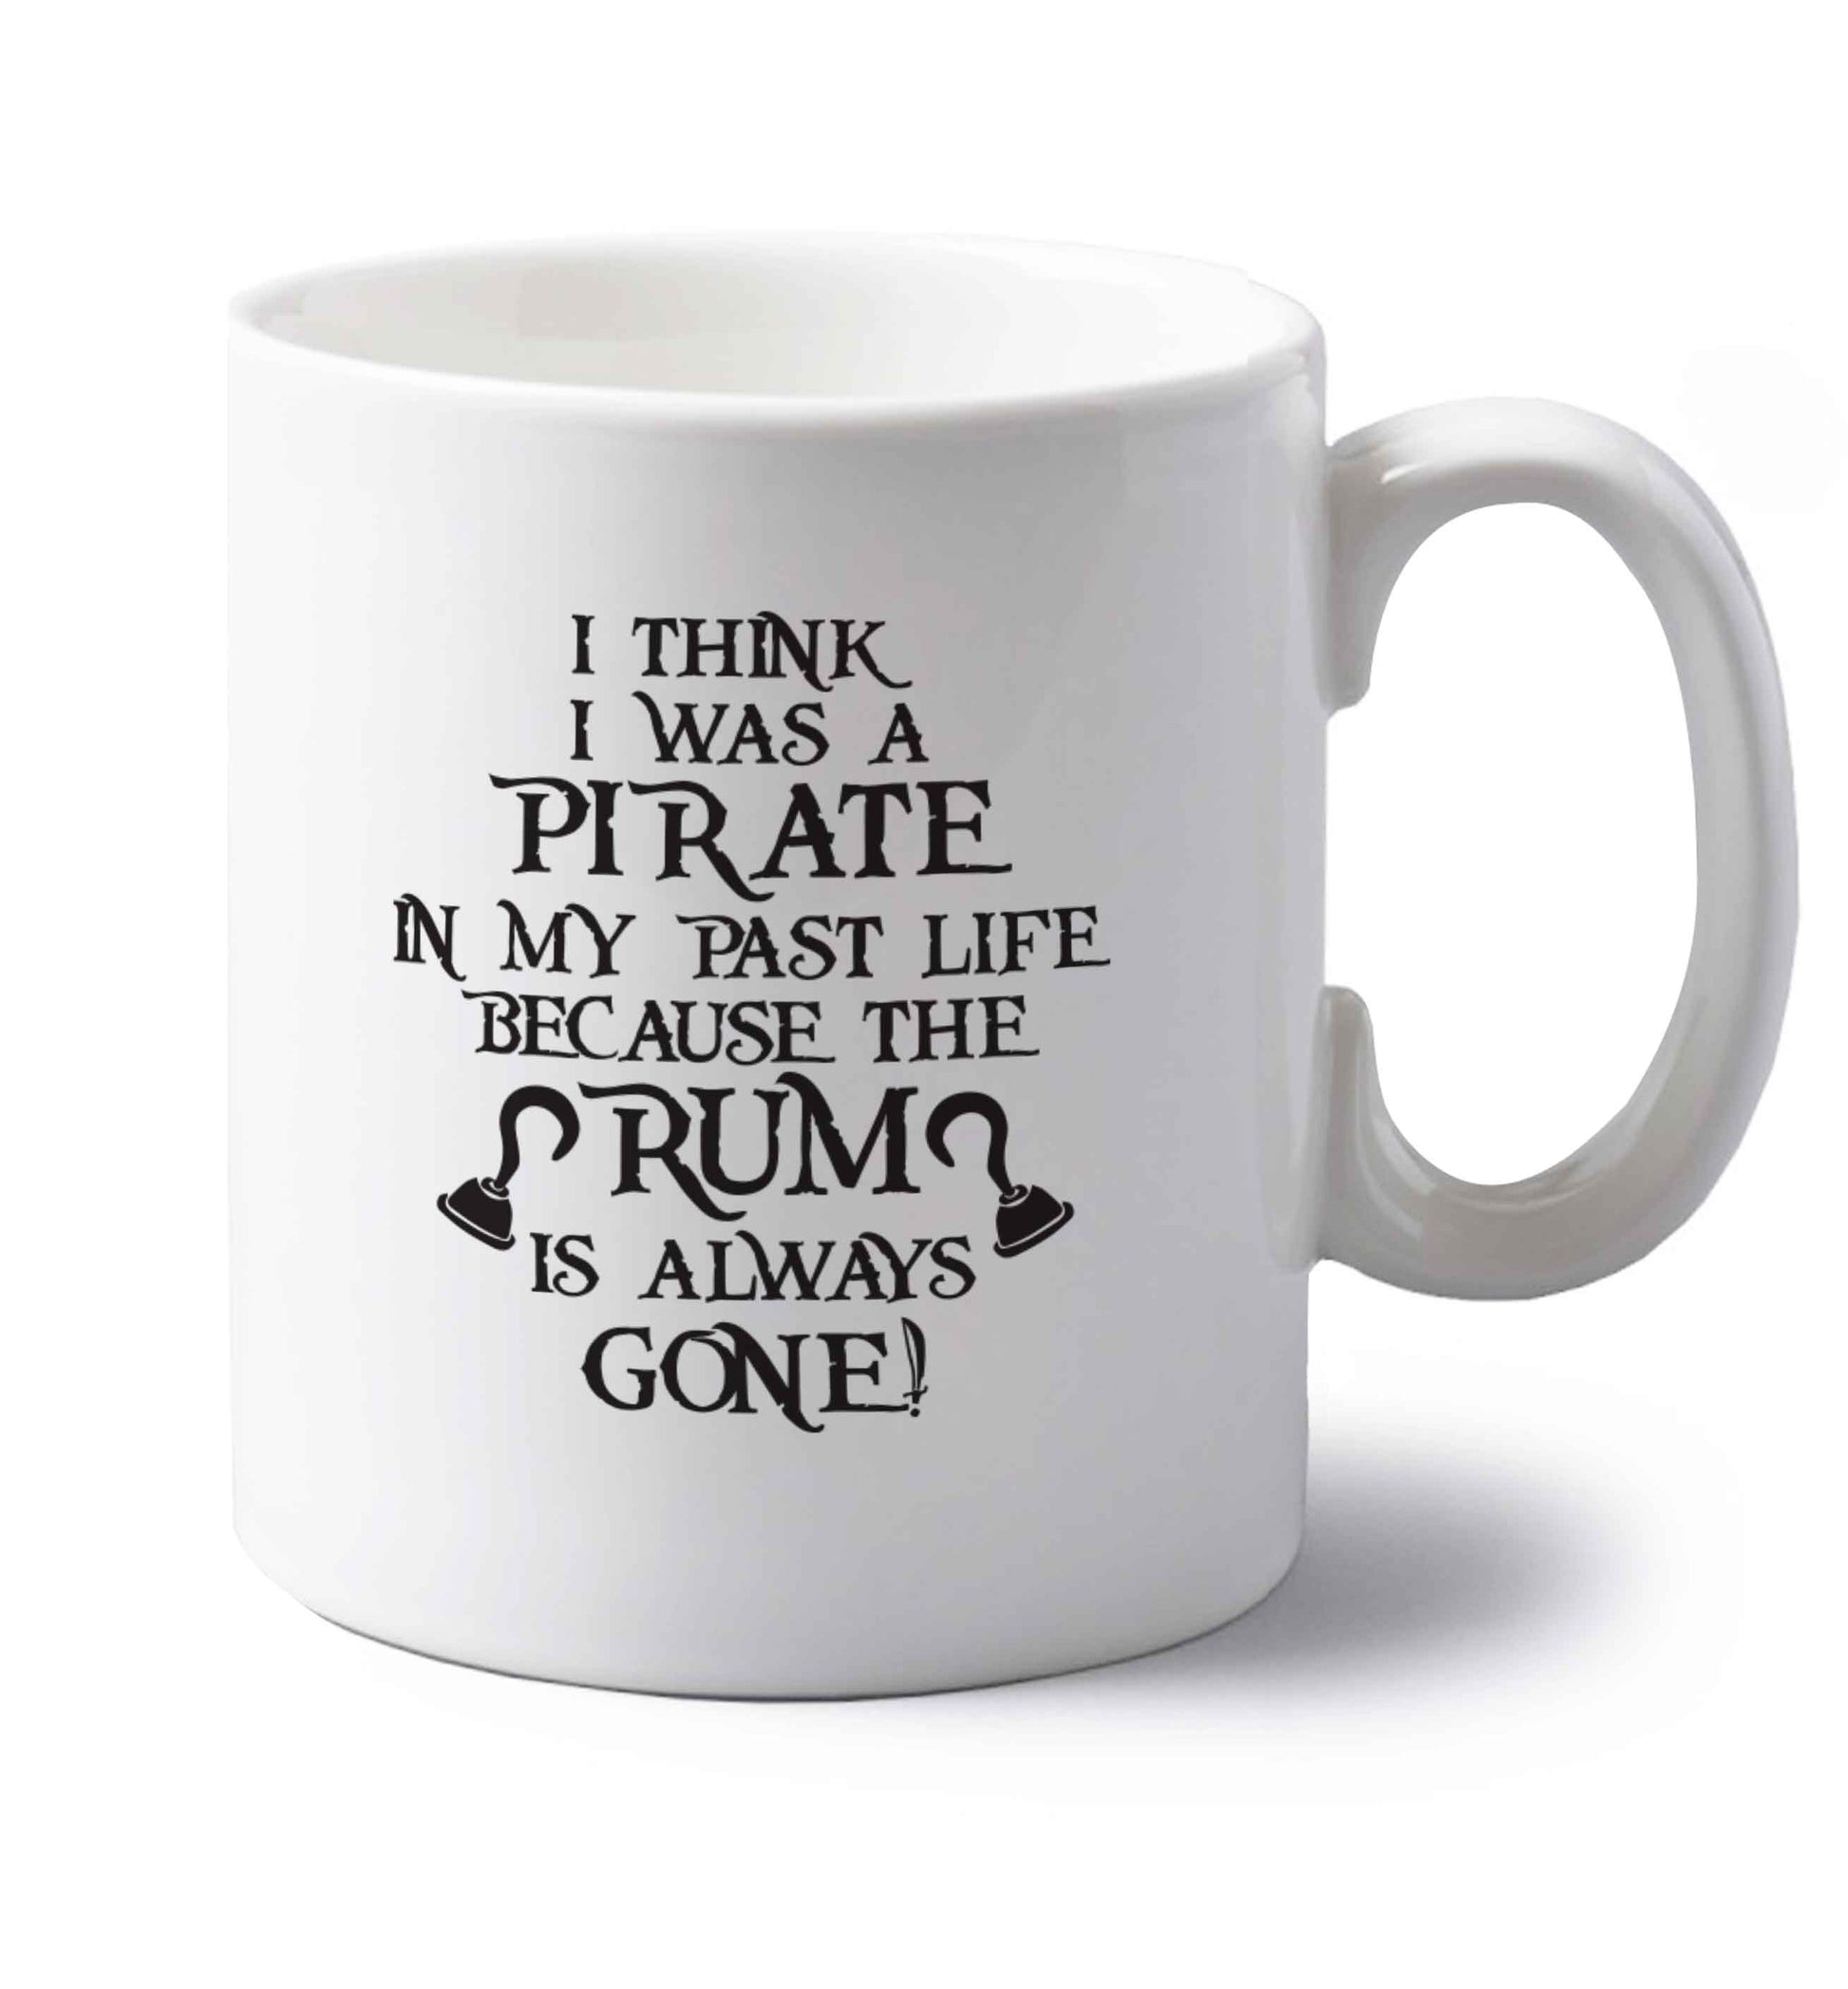 I think I was a pirate in my past life the rum is always gone left handed white ceramic mug 